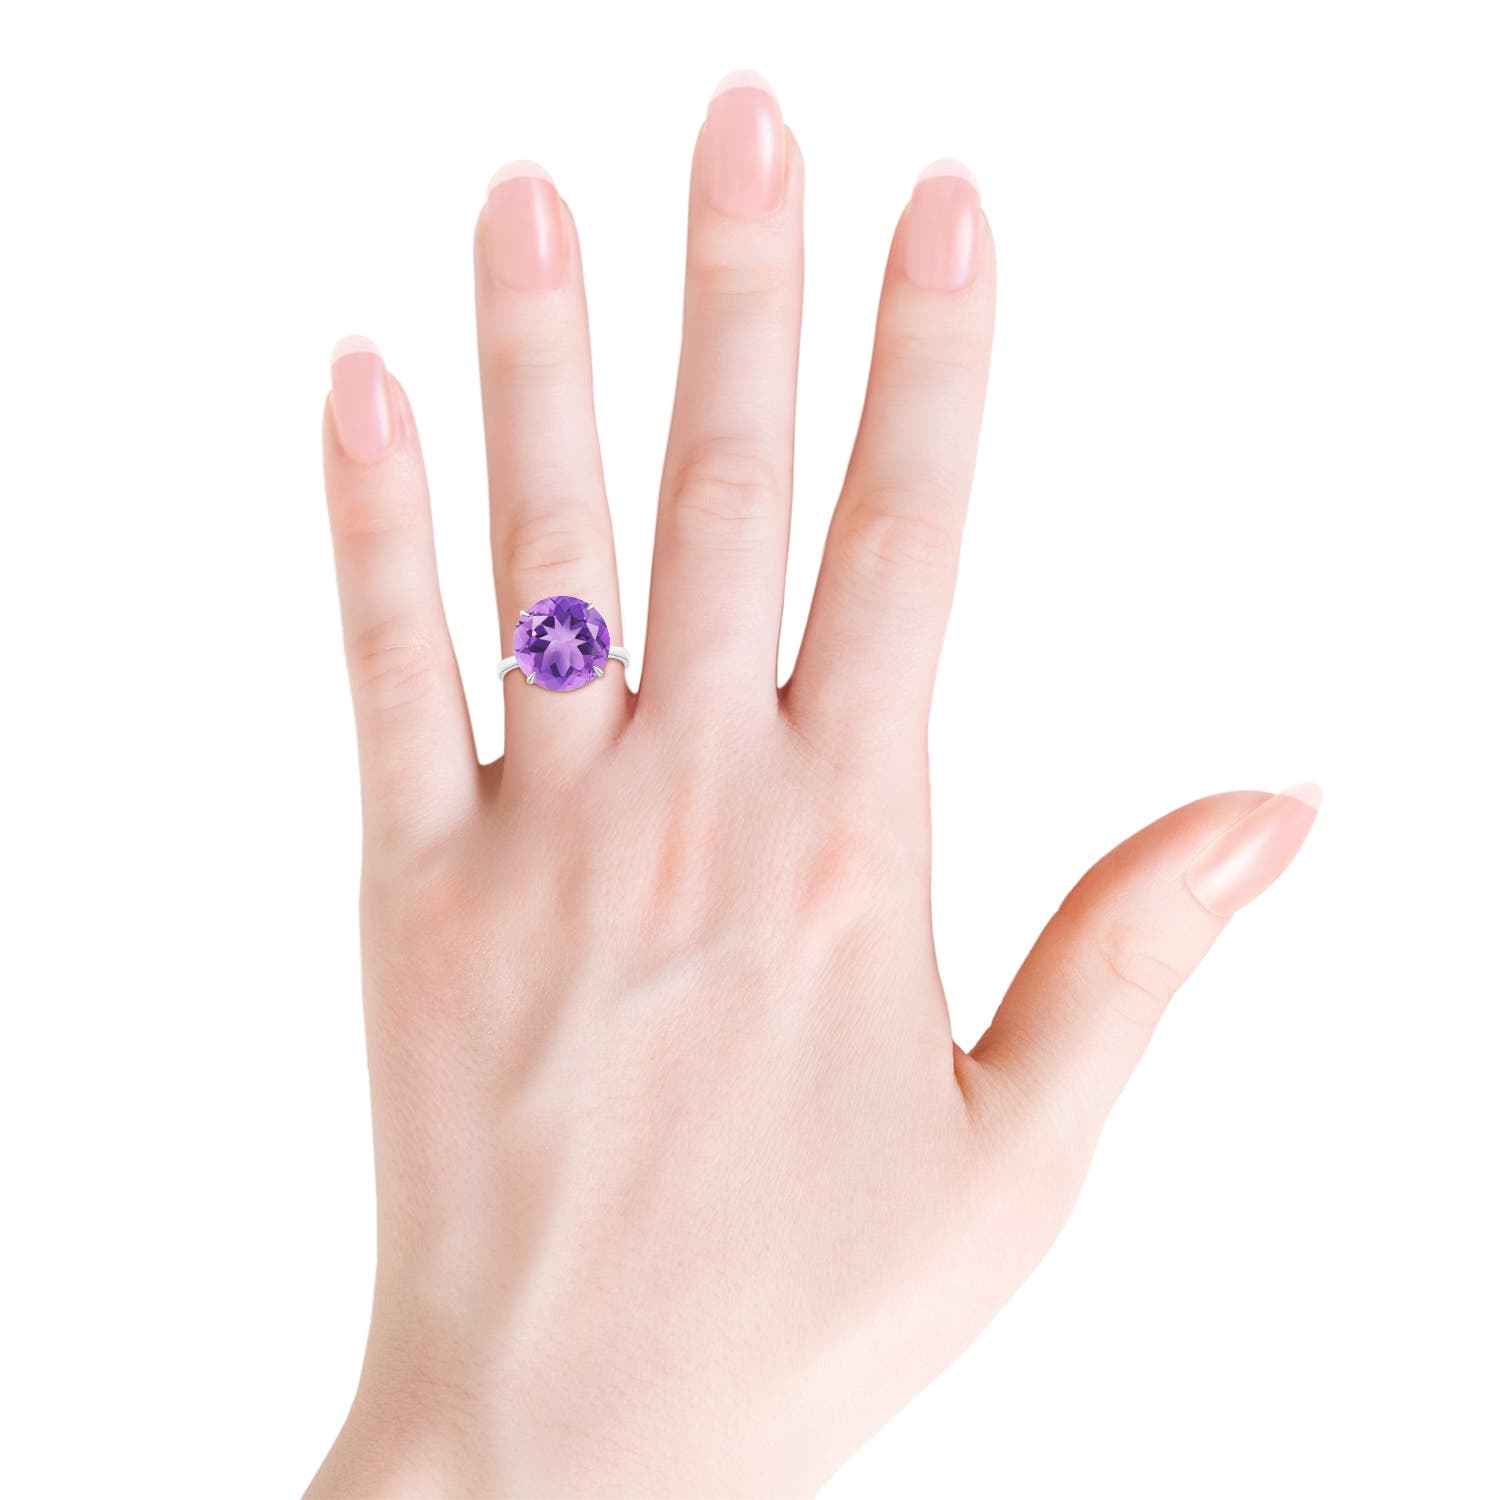 A- Amethyst / 7.2 CT / 14 KT White Gold